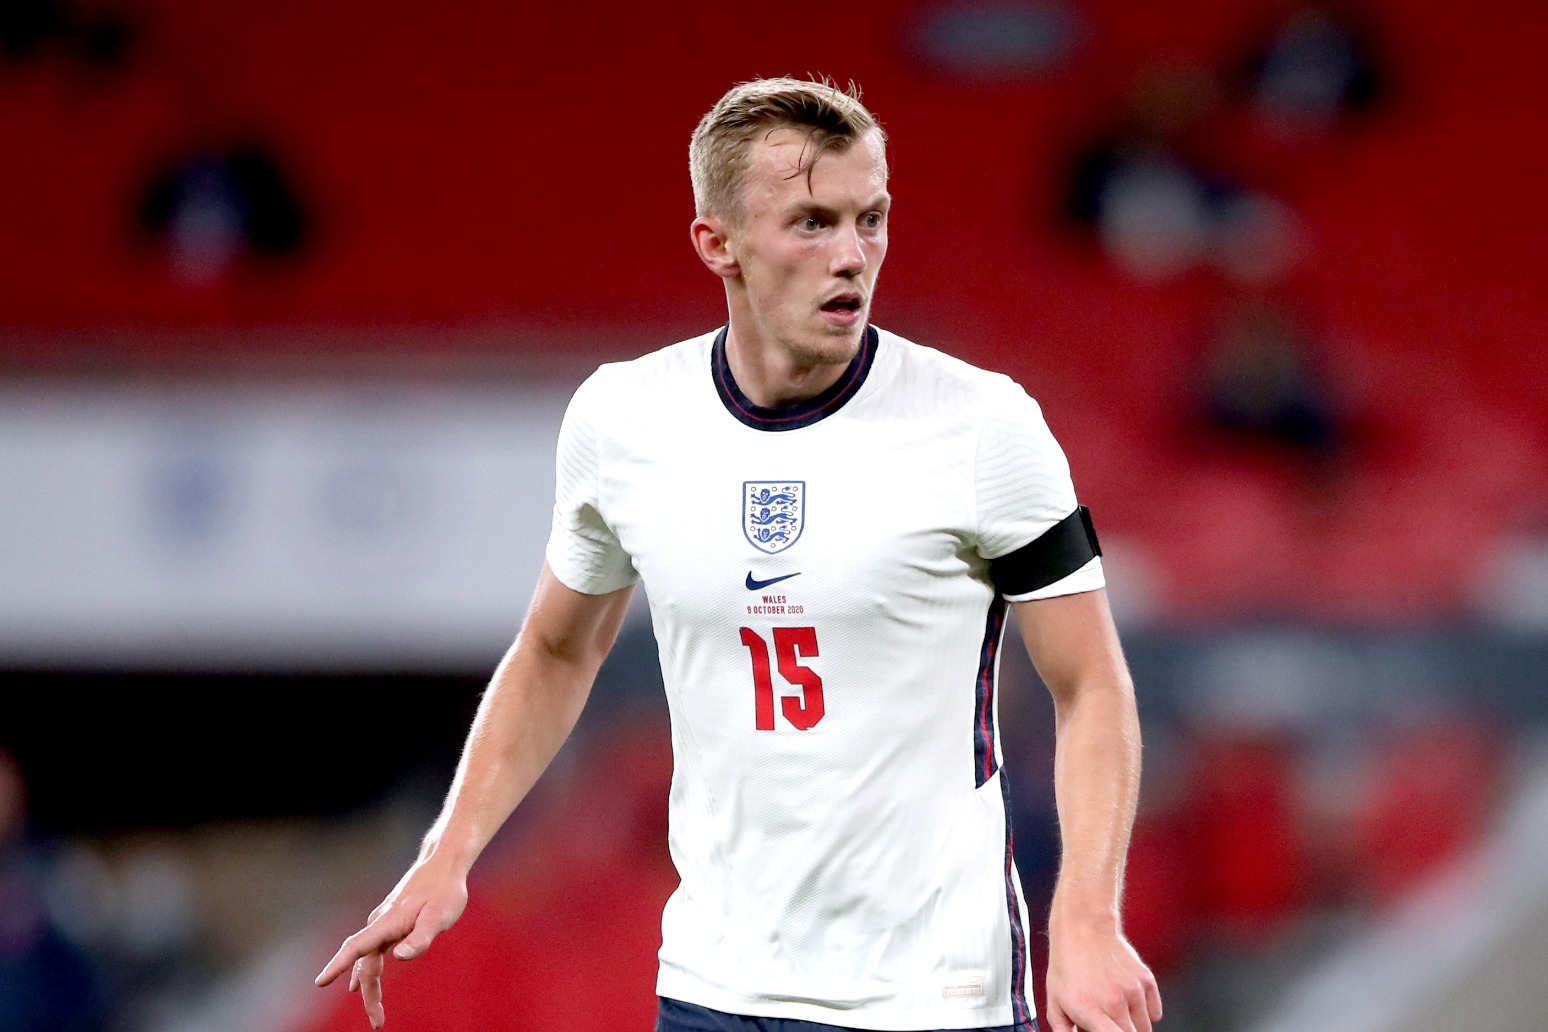 Southampton captain James Ward-Prowse signs new five-year contract with the club 